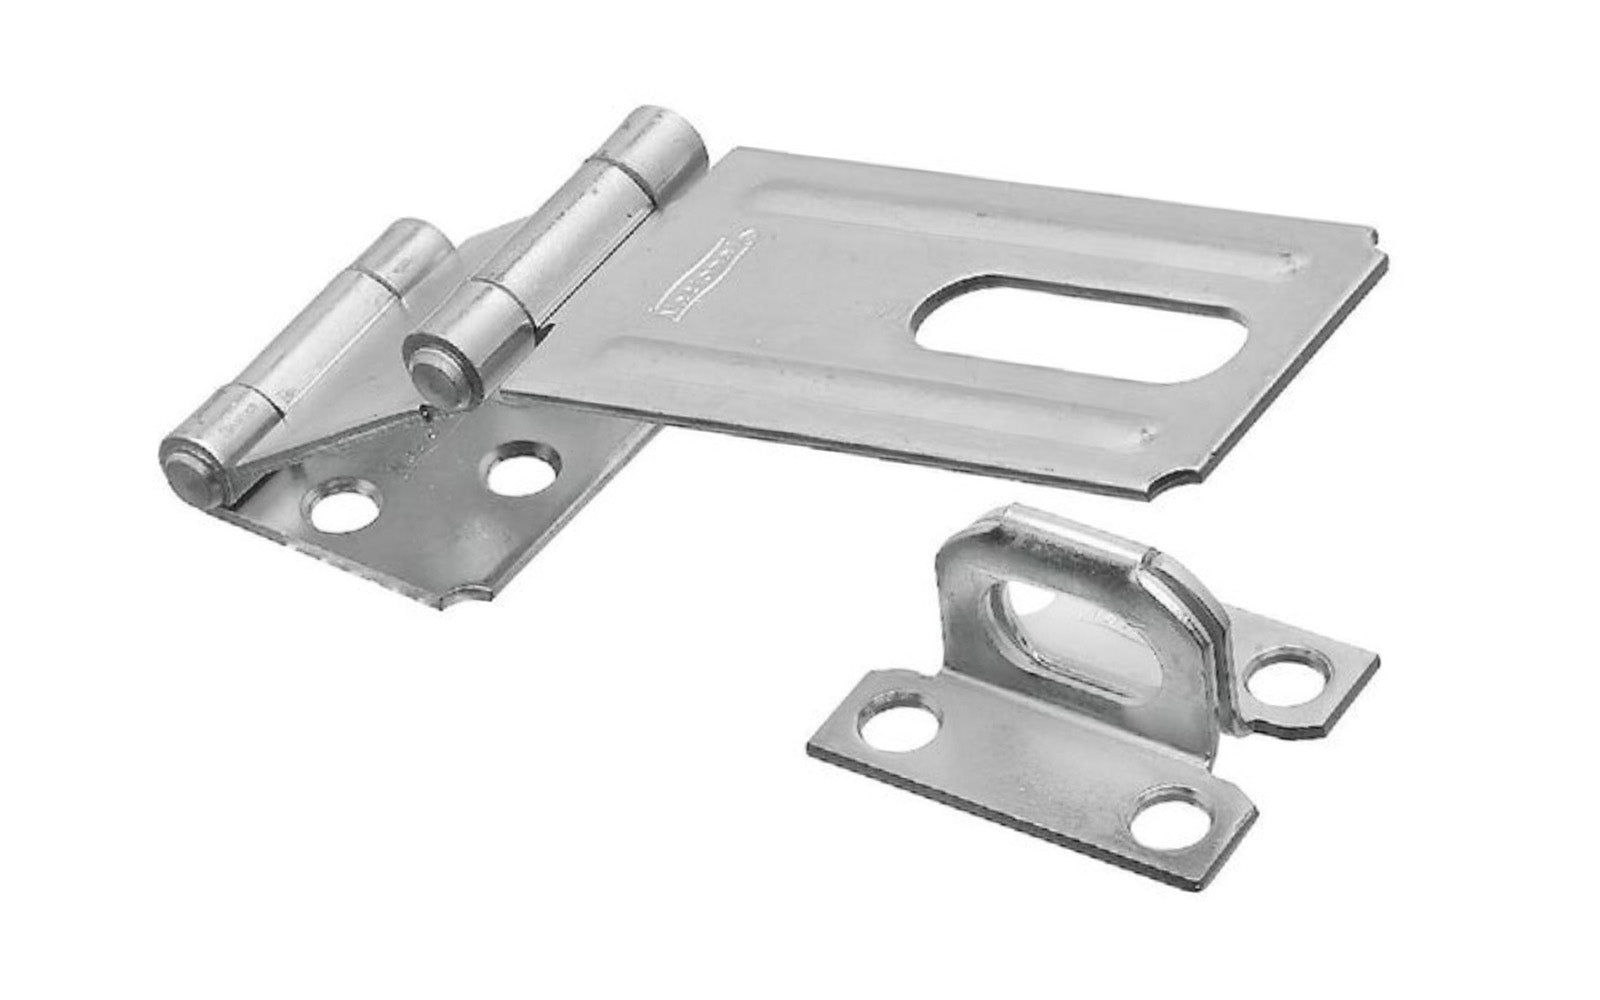 This 3-1/4" zinc-plated double hinge safety hasp is designed for around-the-corner on doors, lockers, chests, tool boxes, etc. For security, all screws are concealed when hasp is closed. Ribbed design for extra strength. Includes a rigid, non-swivel staple.  National Hardware Model N103-259. 038613103252. 